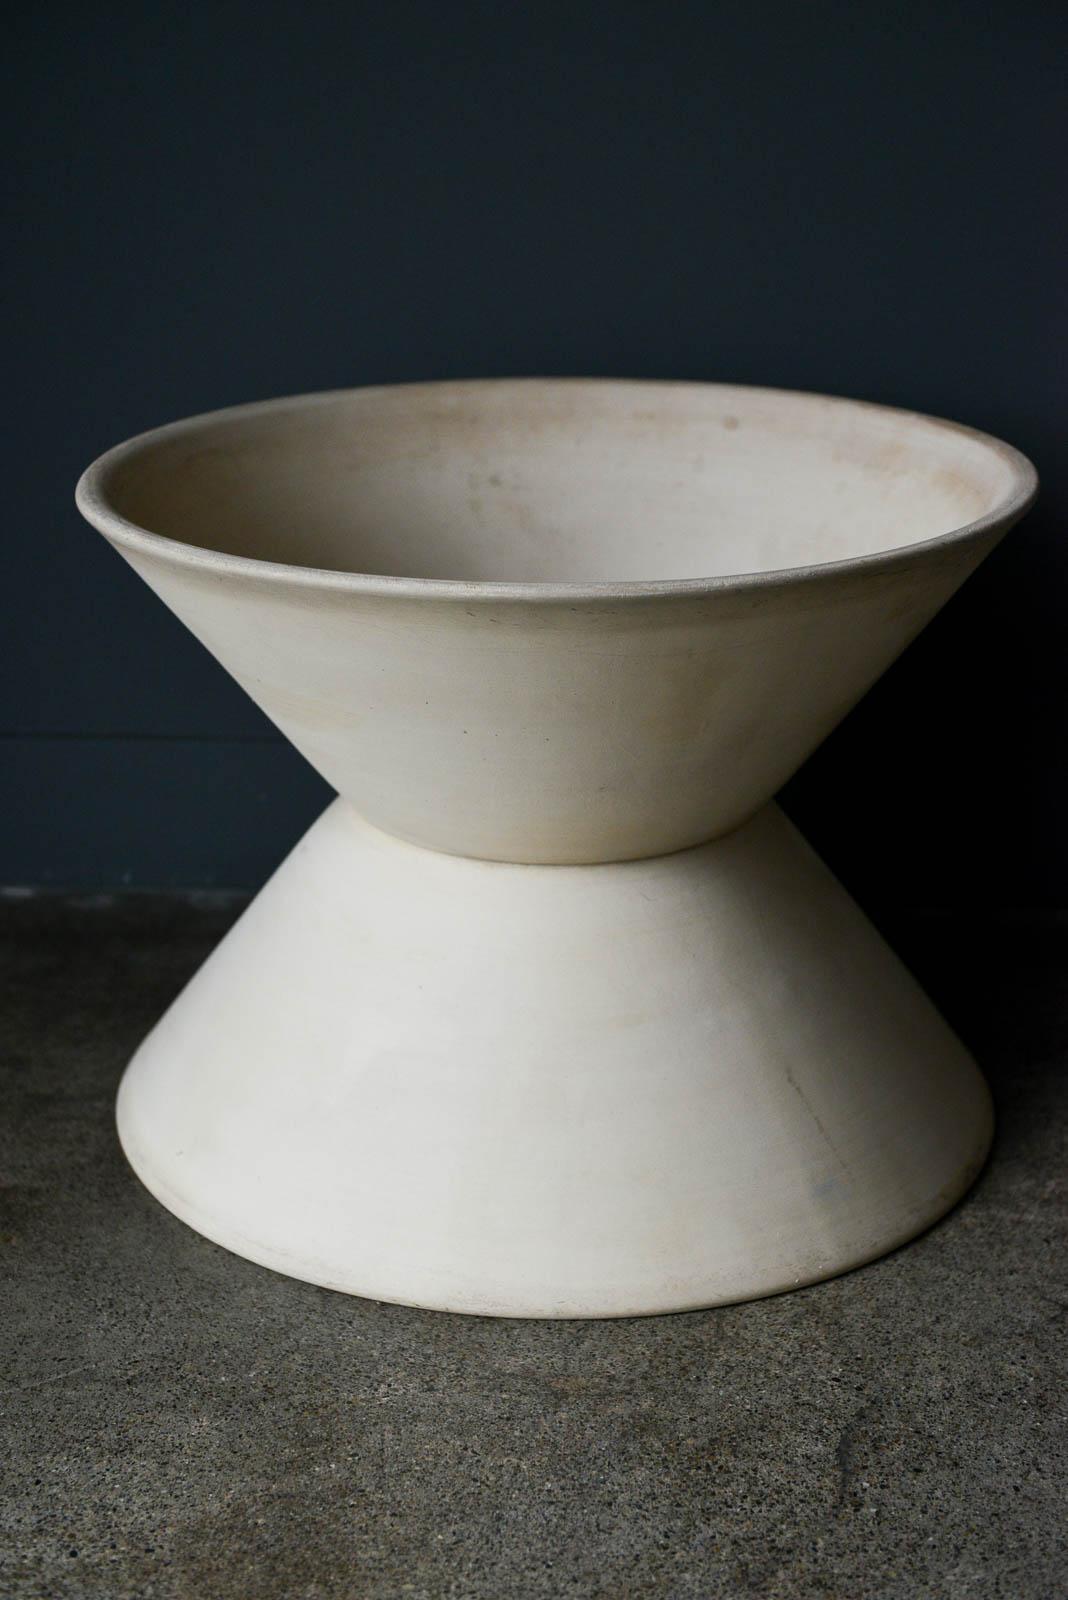 Lagardo Tacket for Architectural Pottery T-103 bisque double wok, circa 1955. Original fired bisque (unglazed) finish in good vintage condition with only a slight imperfection on the lip and a firing crack on the underside as shown, otherwise very